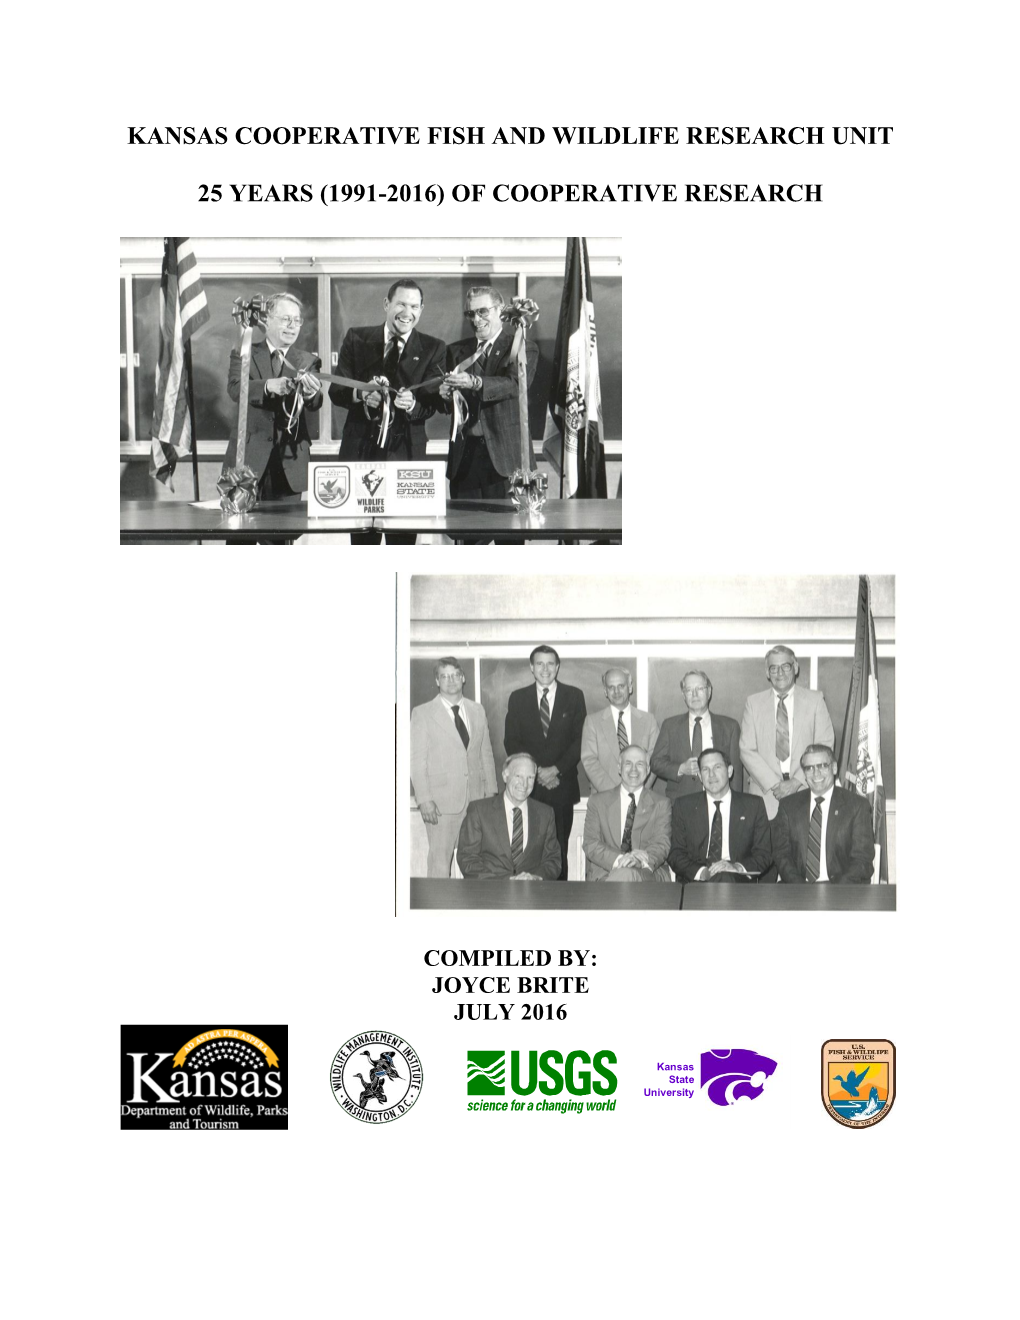 Kansas Cooperative Fish and Wildlife Research Unit 25